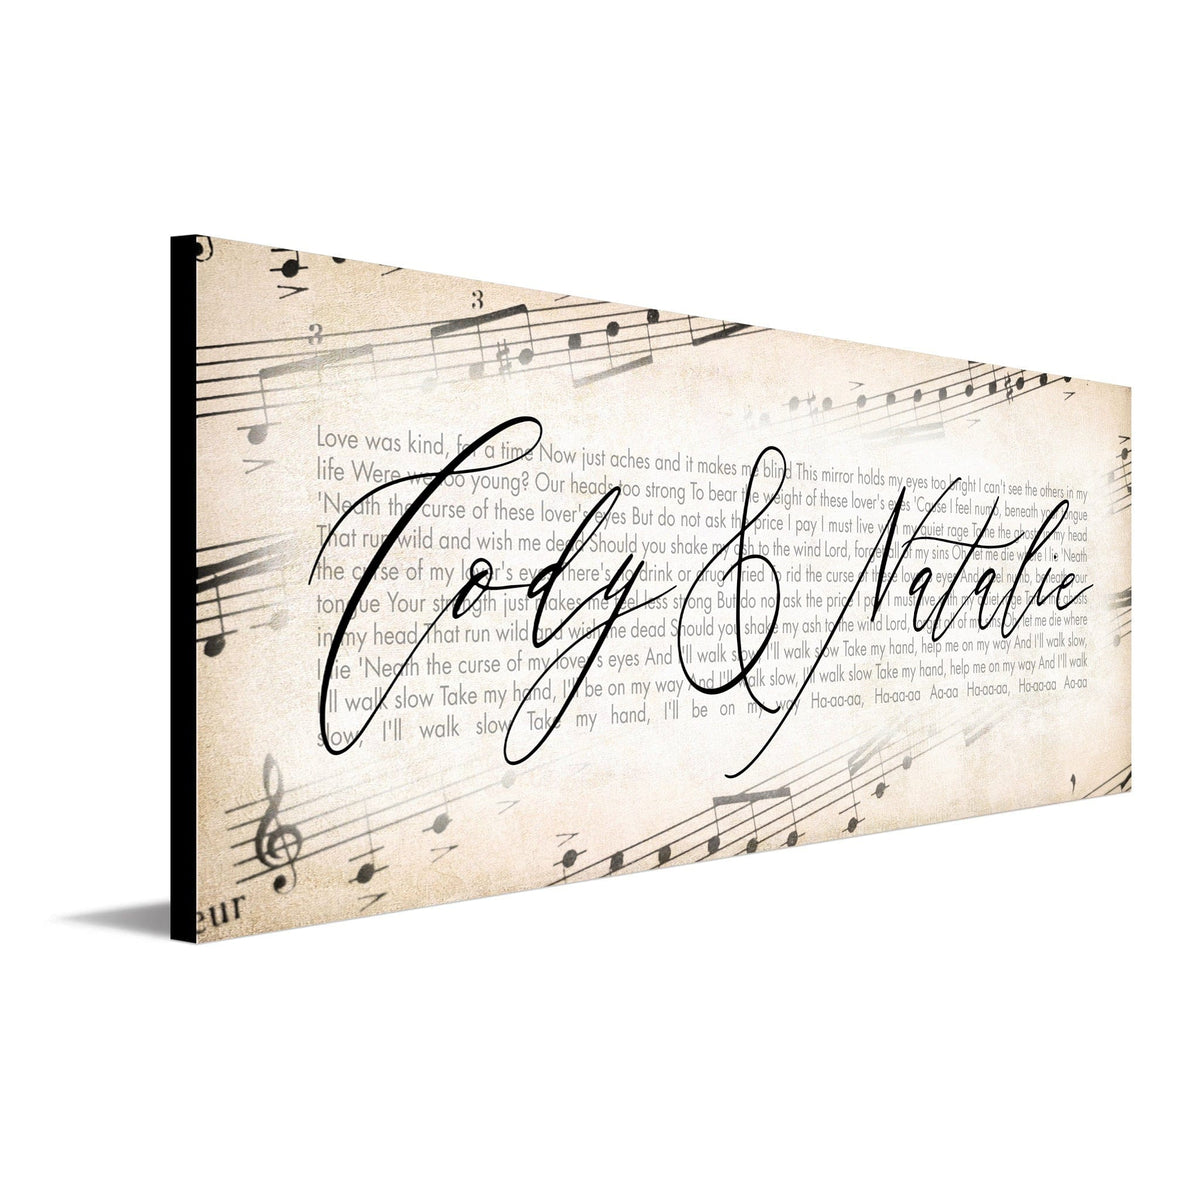 Romantic Personalized Gift from Personal Prints features your names and your song in the art